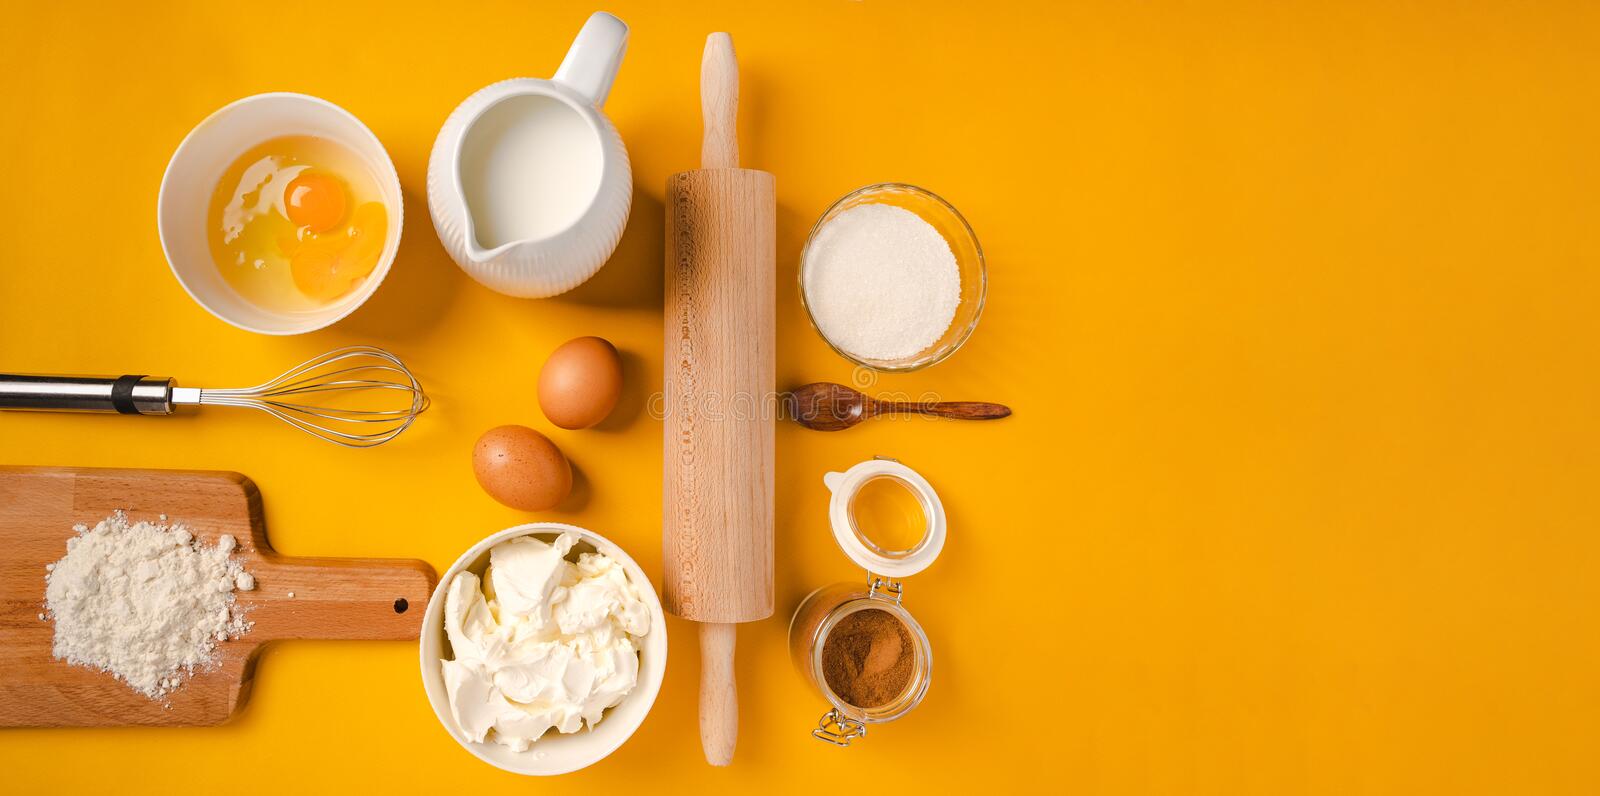 The essential baking tools you need!